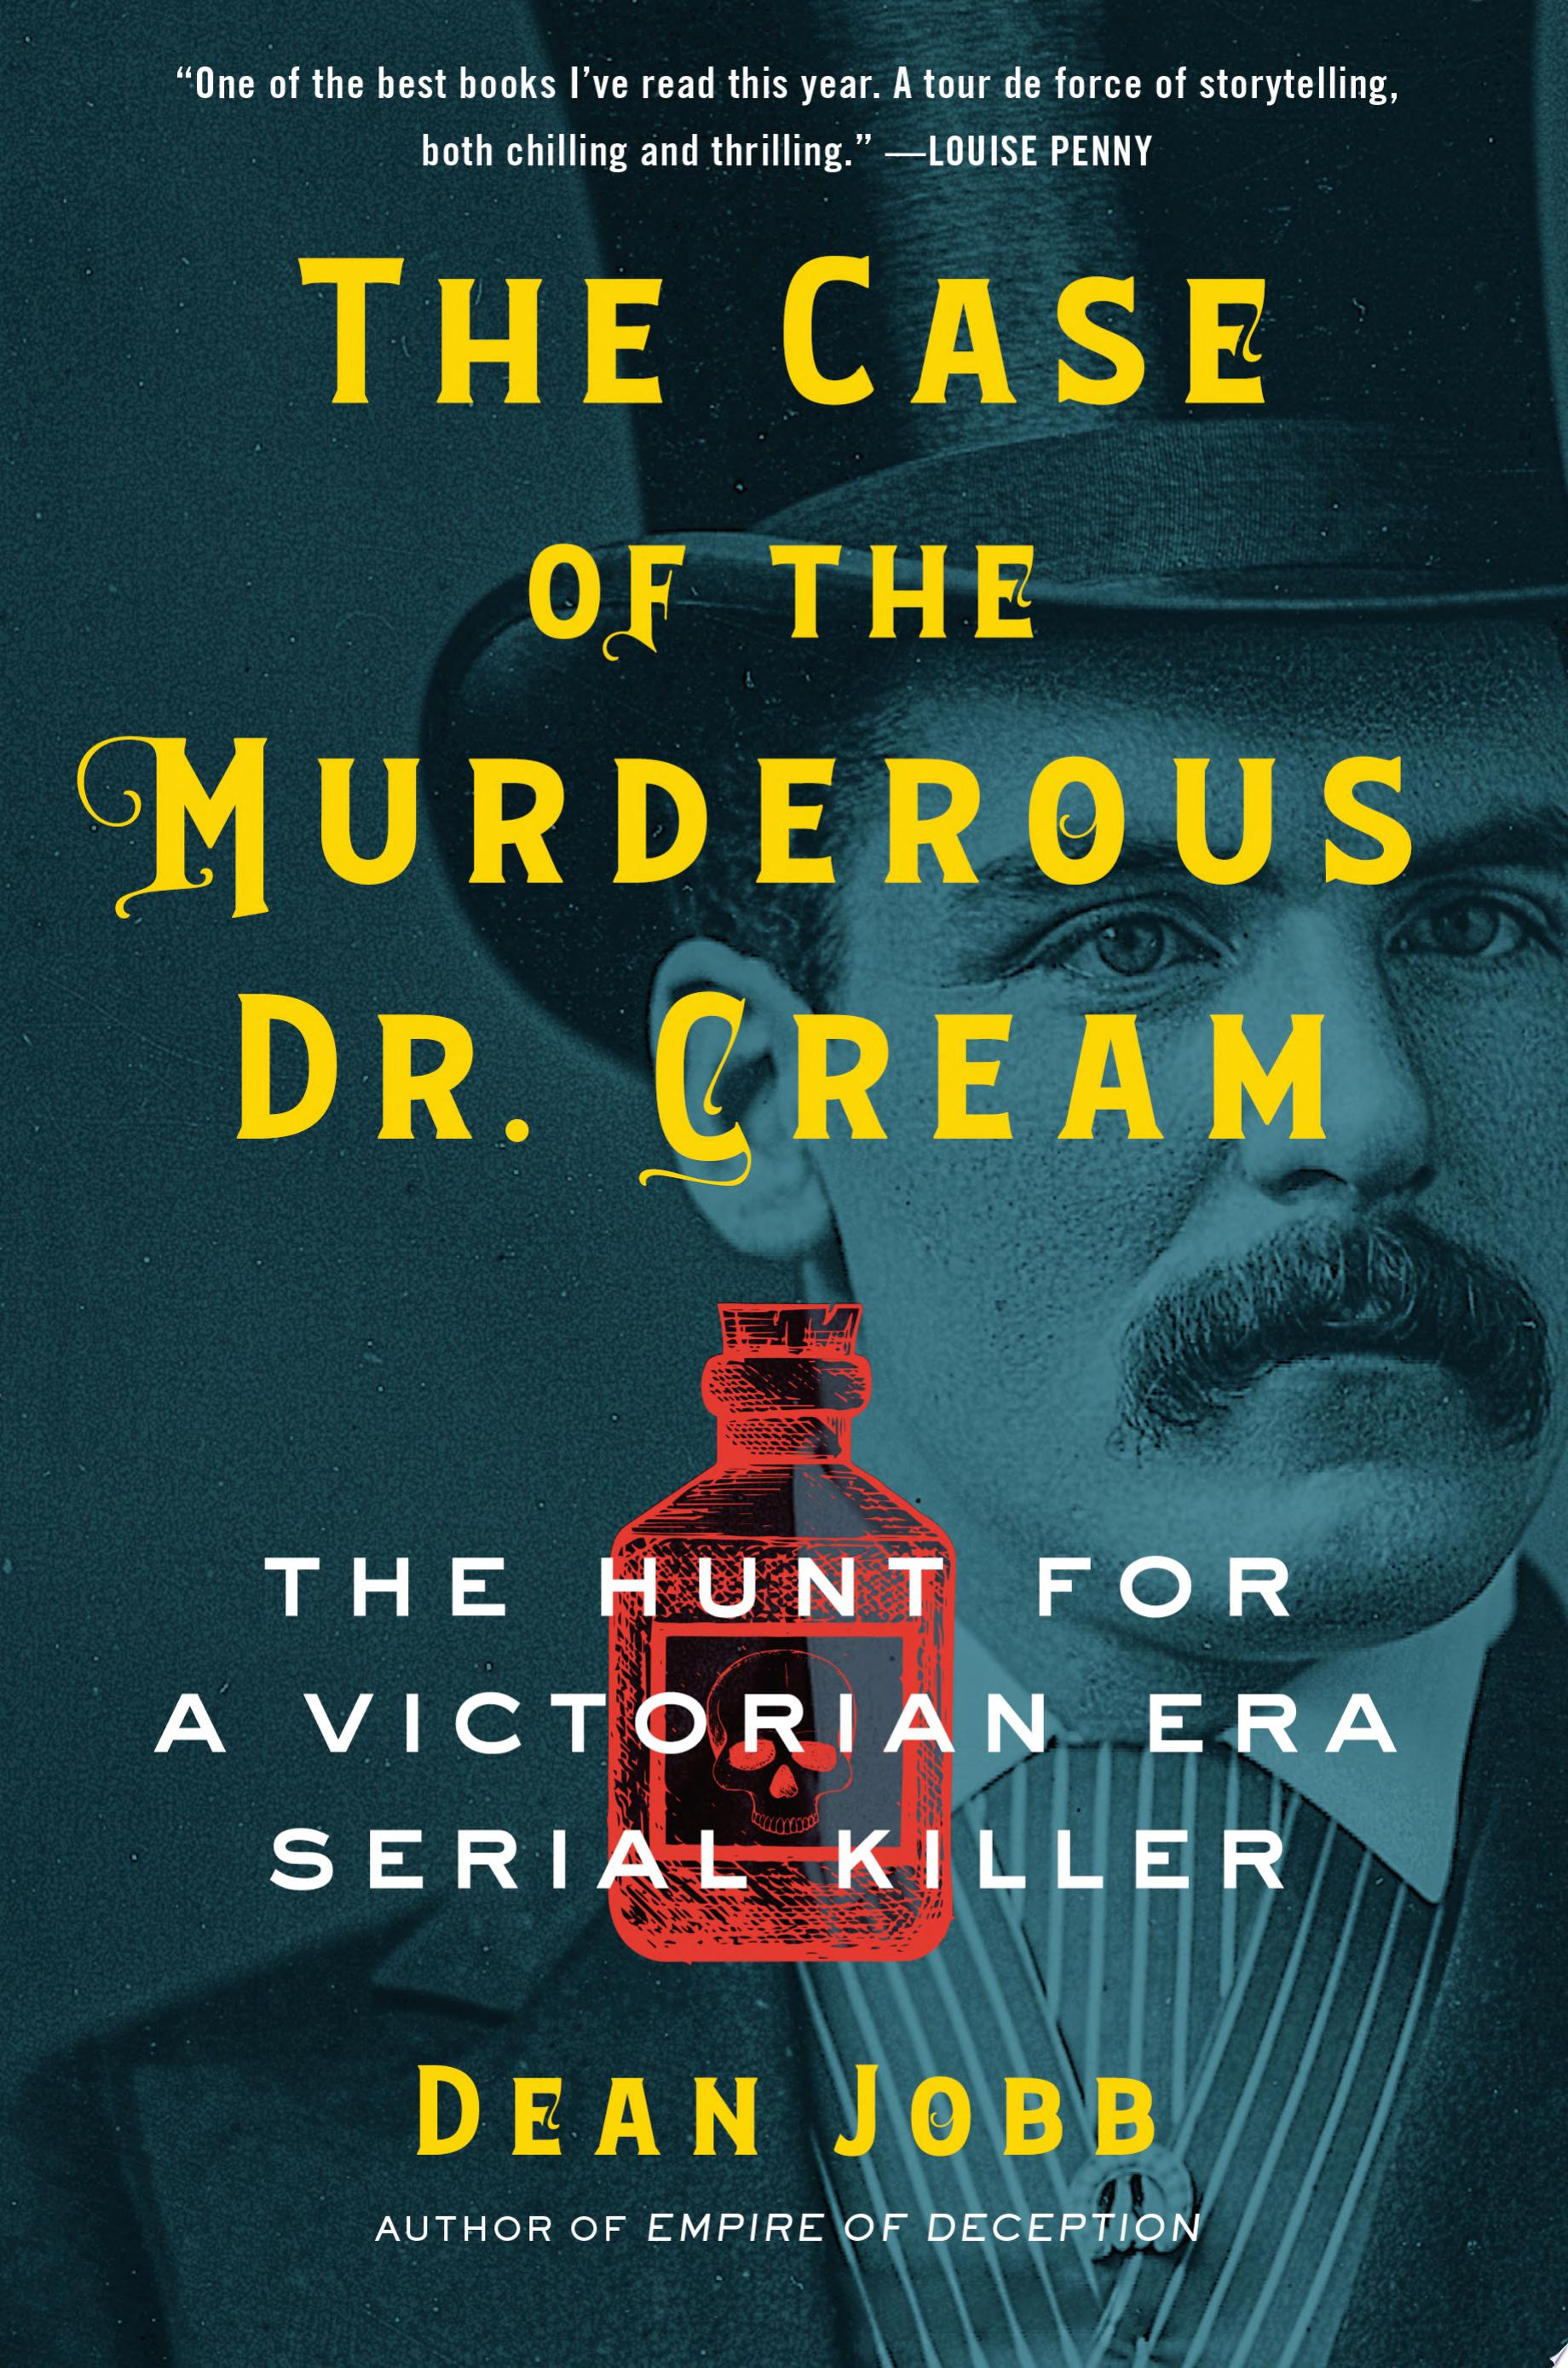 Image for "The Case of the Murderous Dr. Cream"